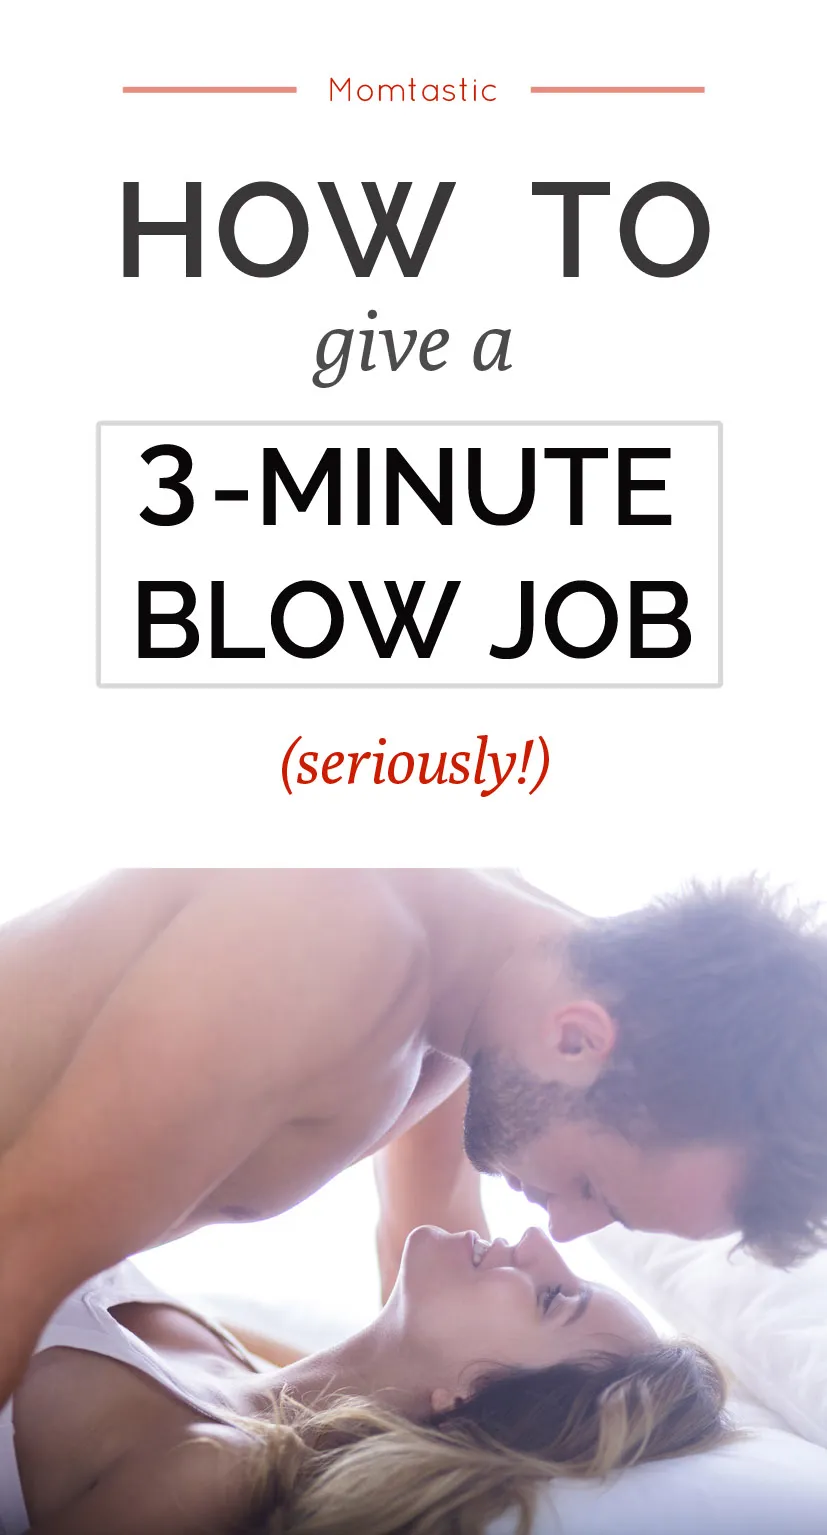 barbara titley recommends blow jobs for beginners pic